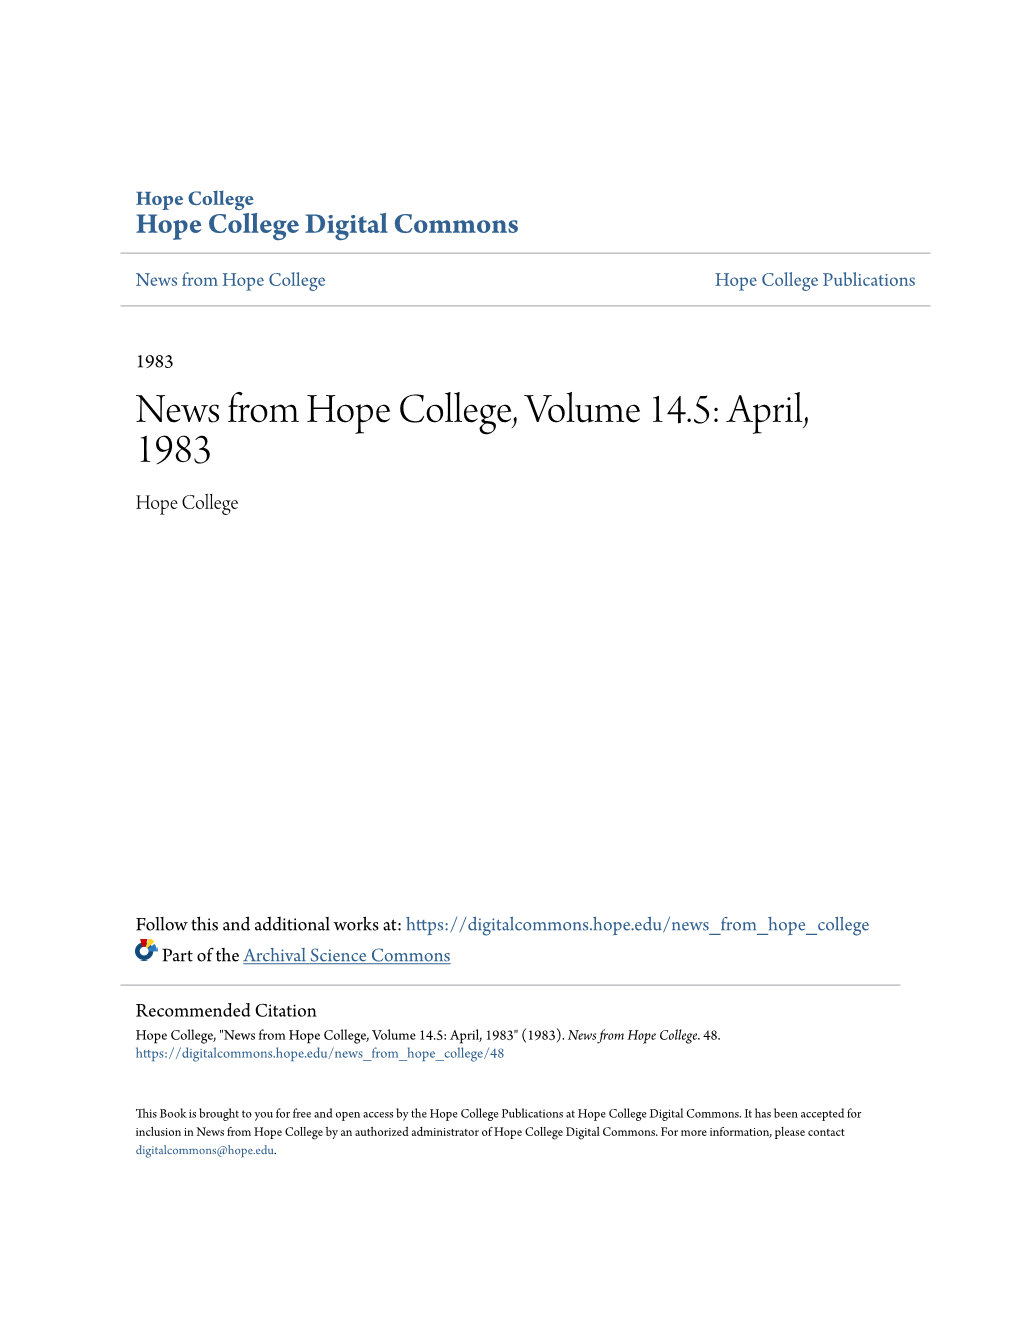 News from Hope College, Volume 14.5: April, 1983 Hope College